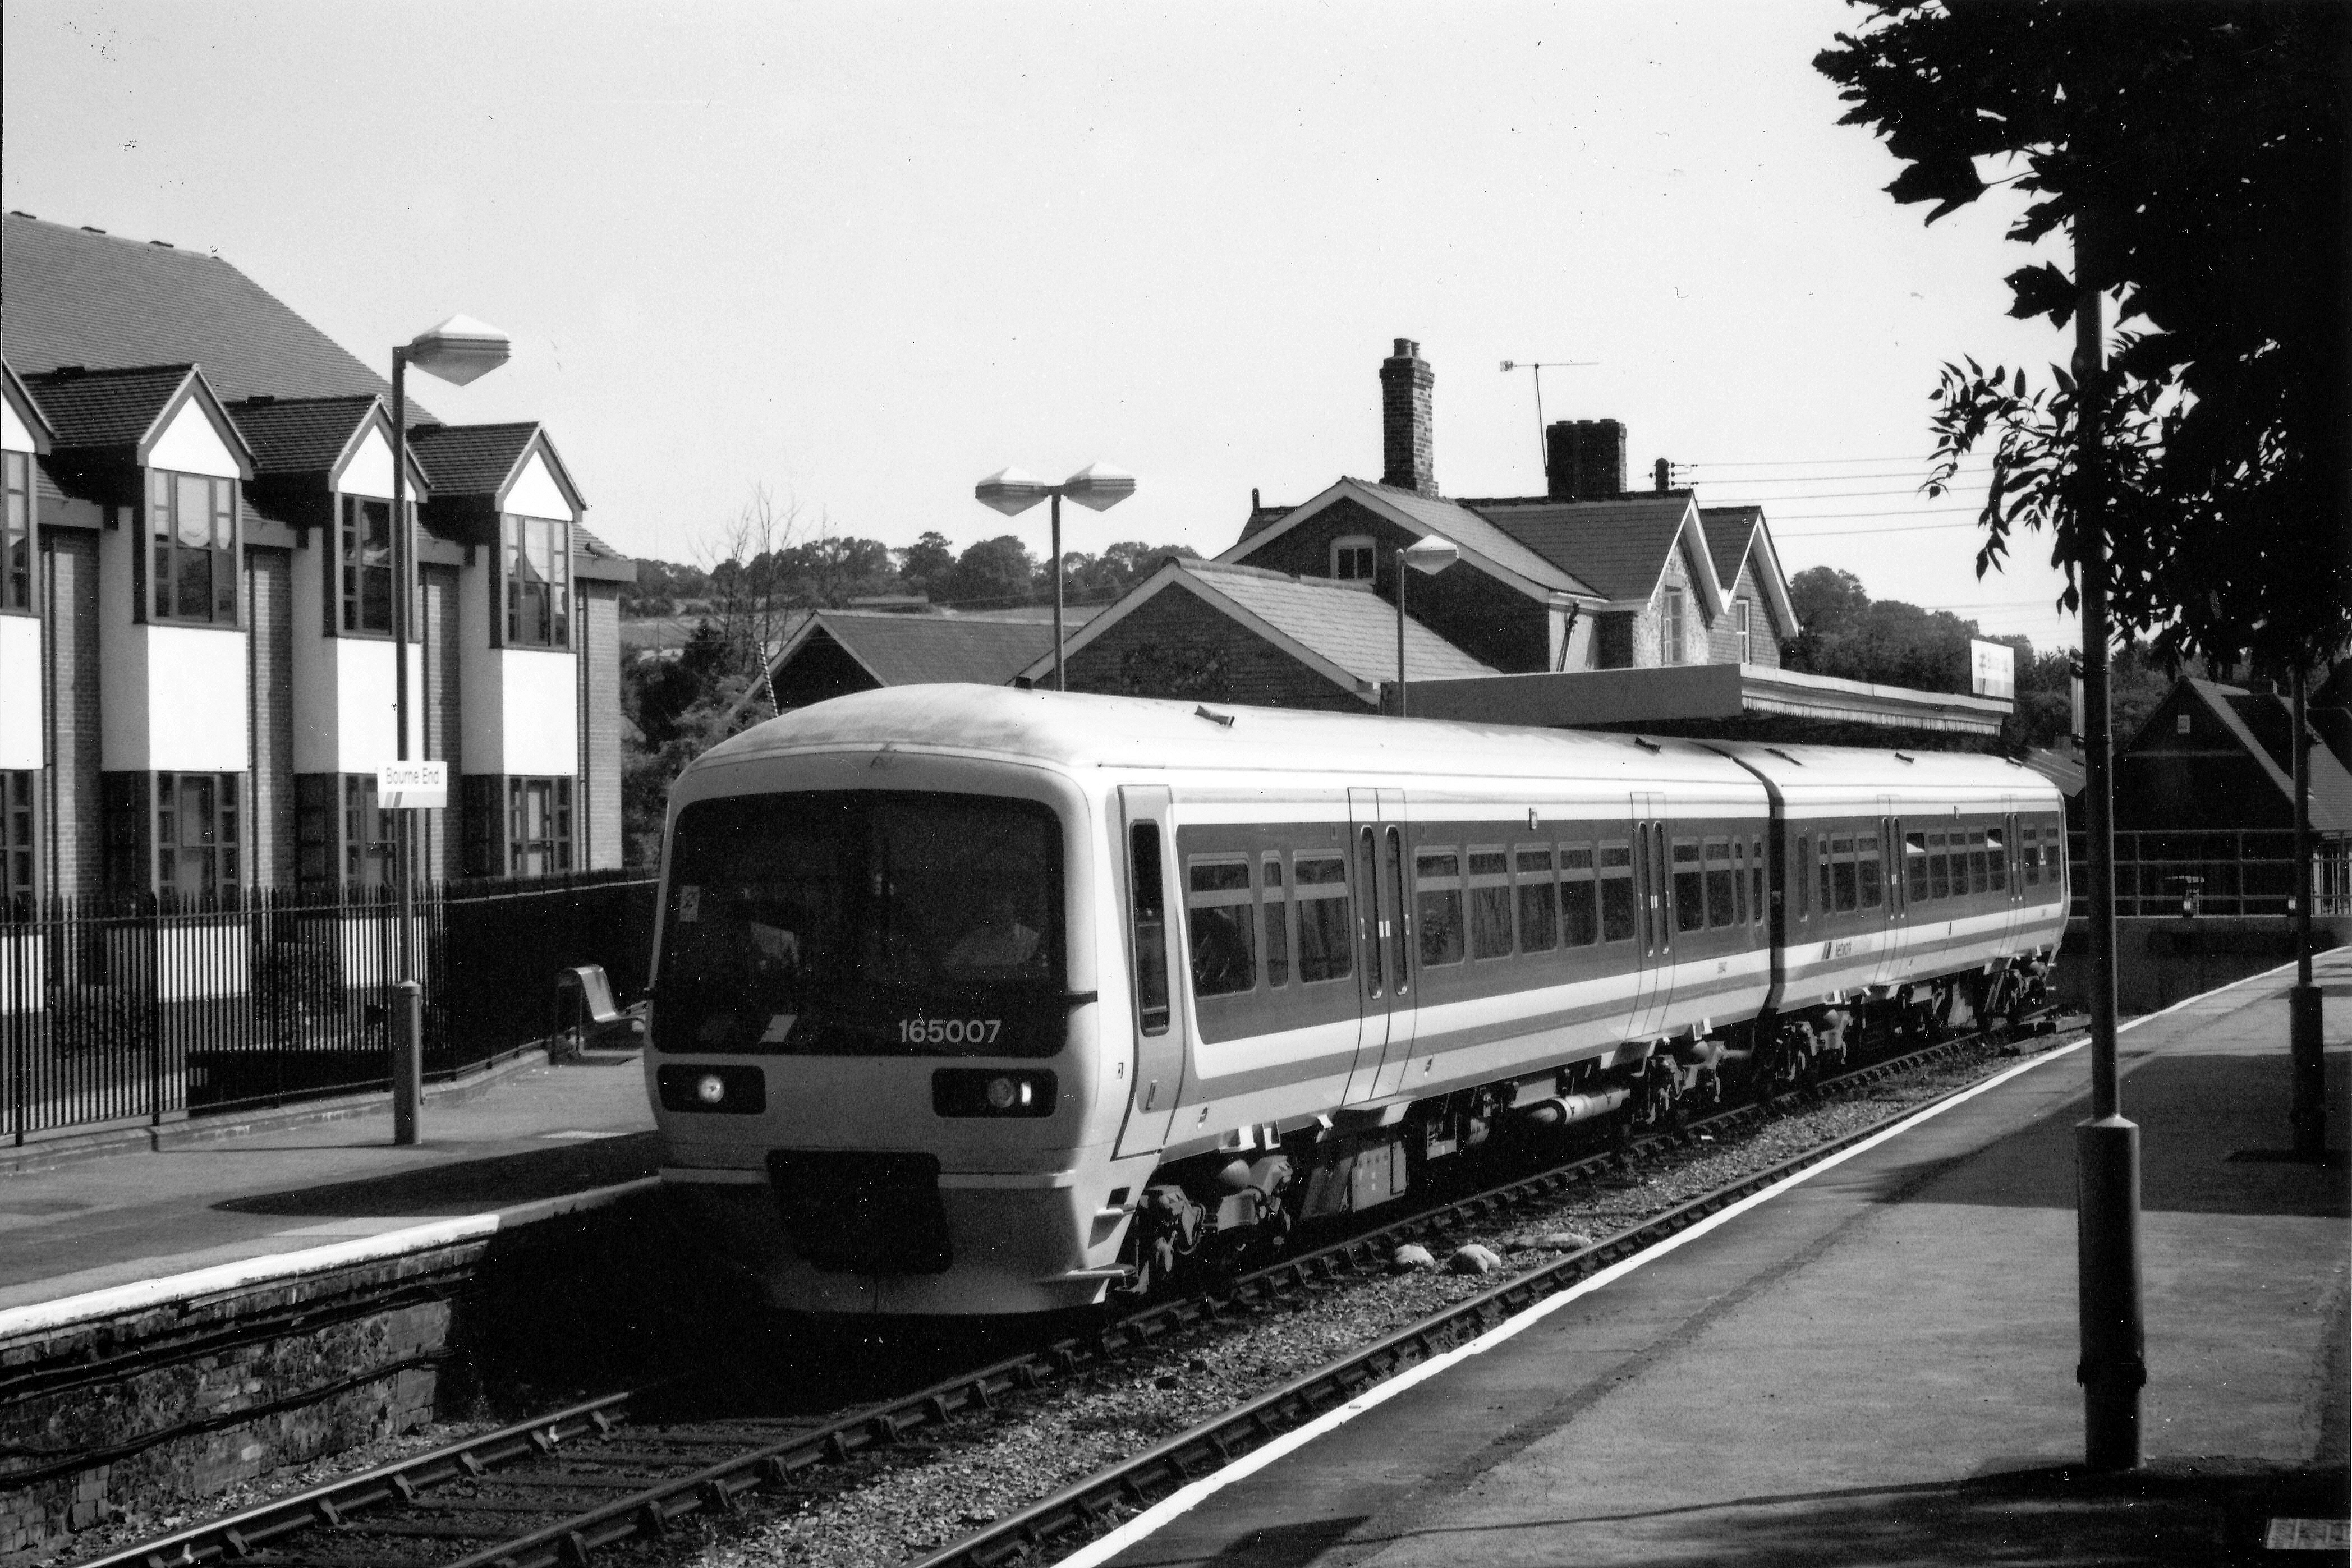 165007 prepares to depart from Bourne End